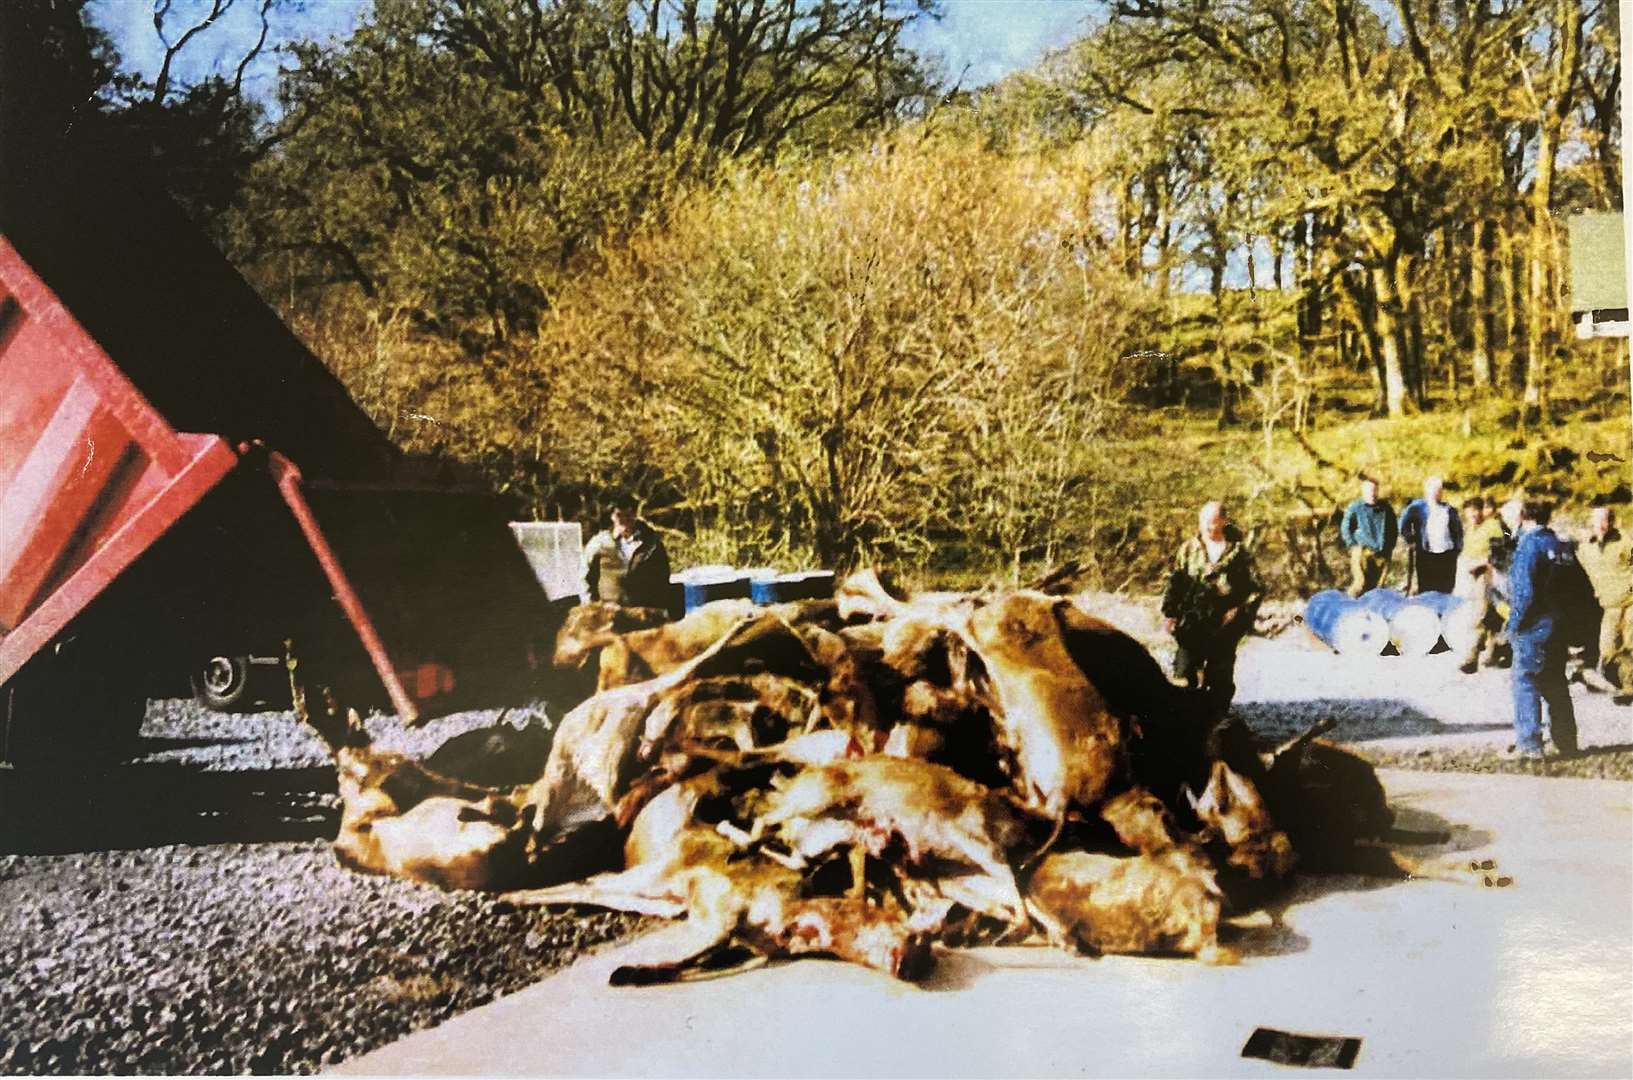 March 2002: deer carcasses dumped from a lorry onto a car park after lying on a hill for 36 hours. Deer were culled, out-of-season, by Forestry Commission staff within the Queen Elizabeth Forest Park. 130 Carcasses were collected from the hill by helicopter before being dumped in the car park and later sold.